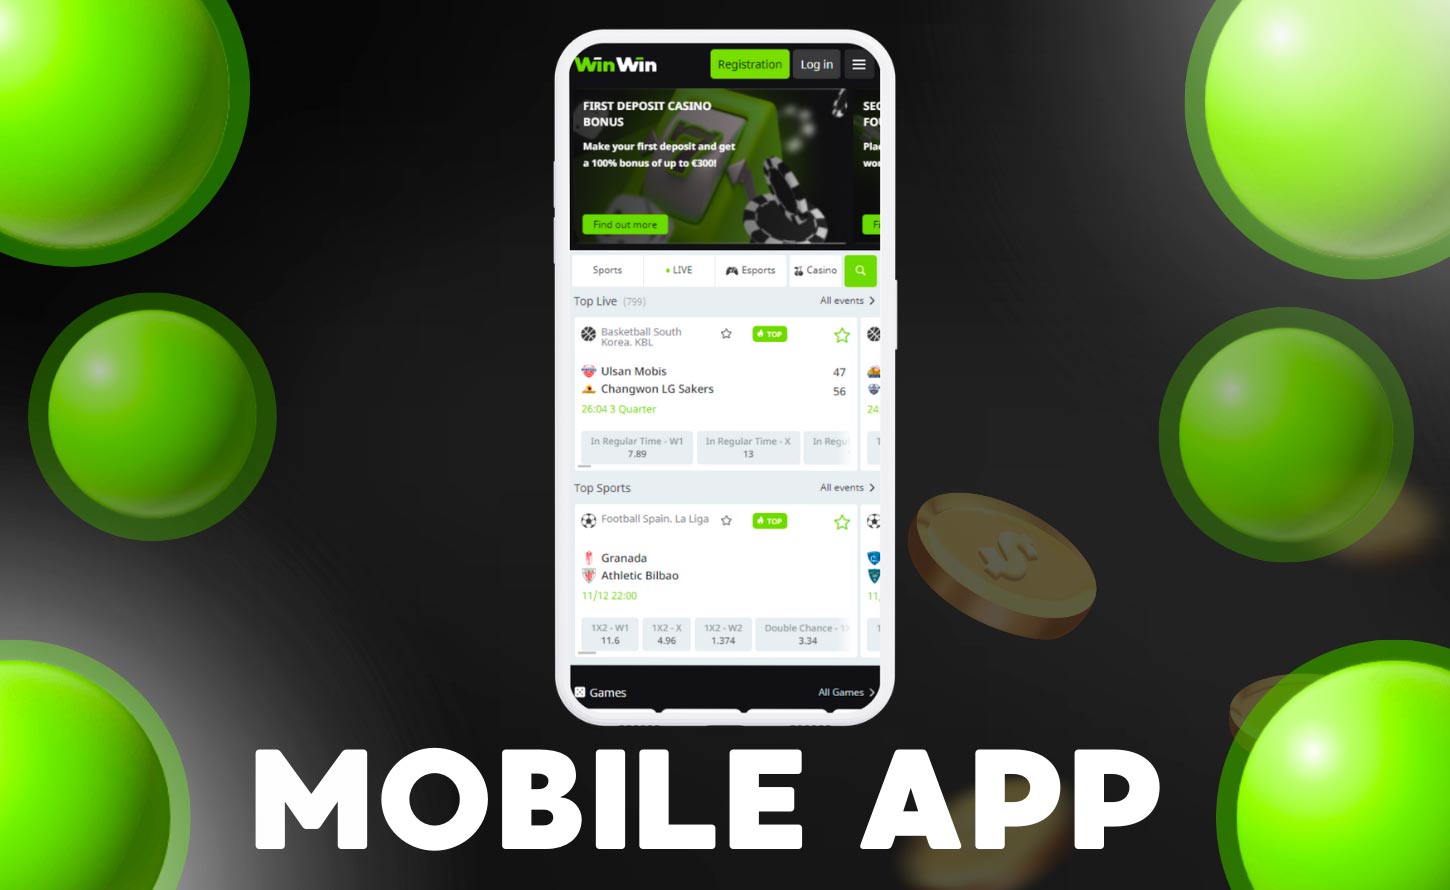 Play Winwin Casino Games & Bet on Sports with the Winwin Mobile App